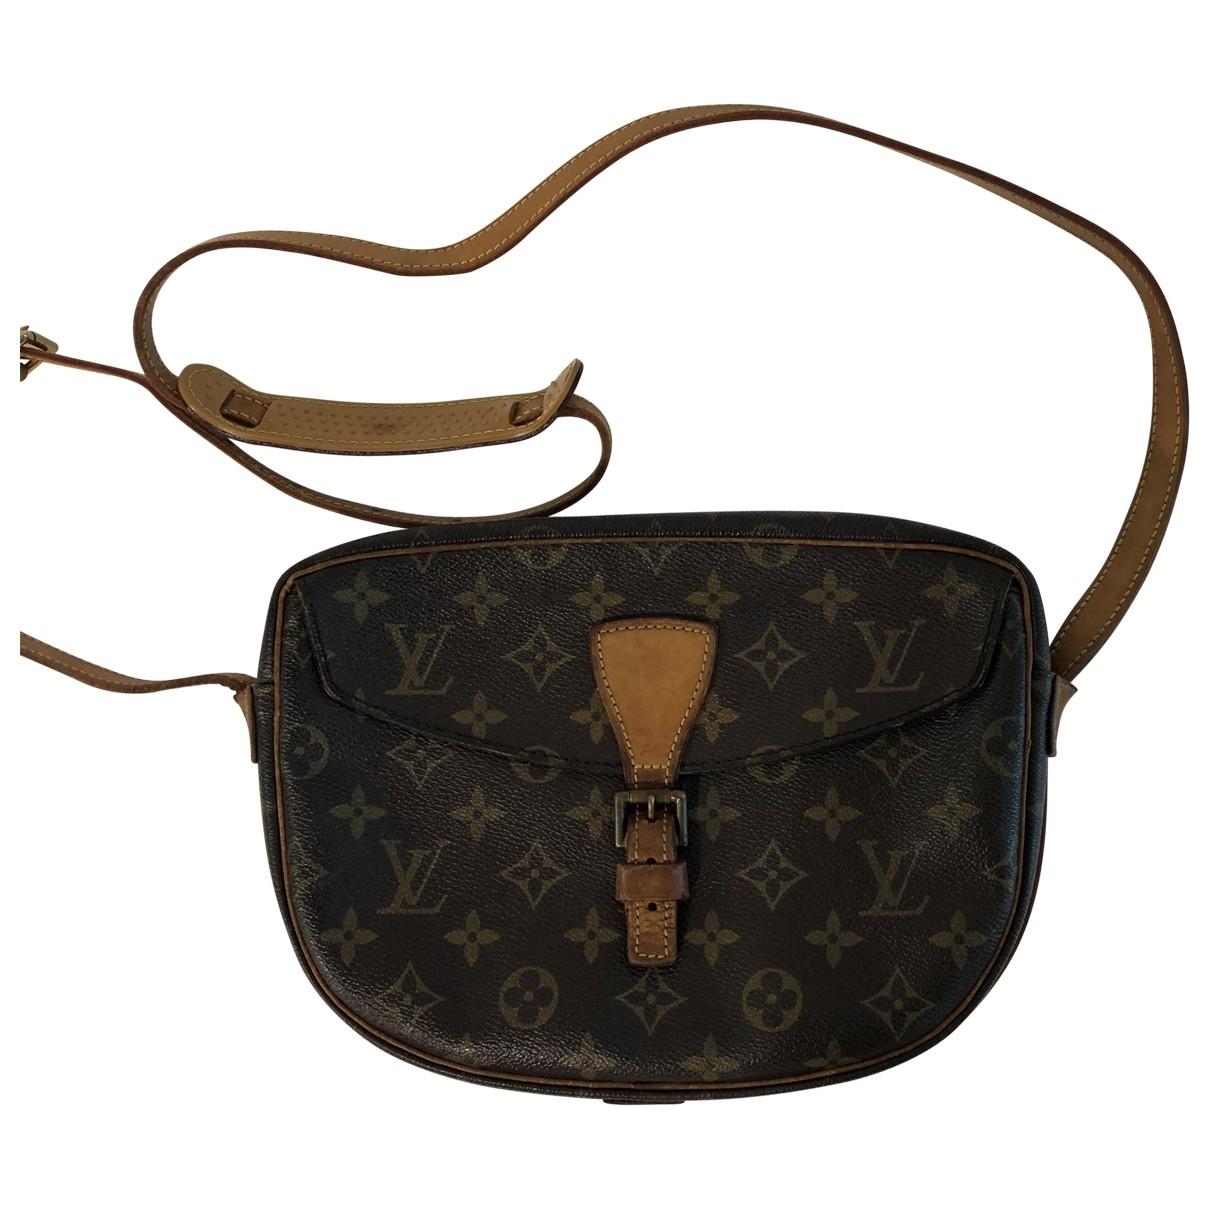 Is Louis Vuitton Sold At Nordstrom Rack Ave. Ny